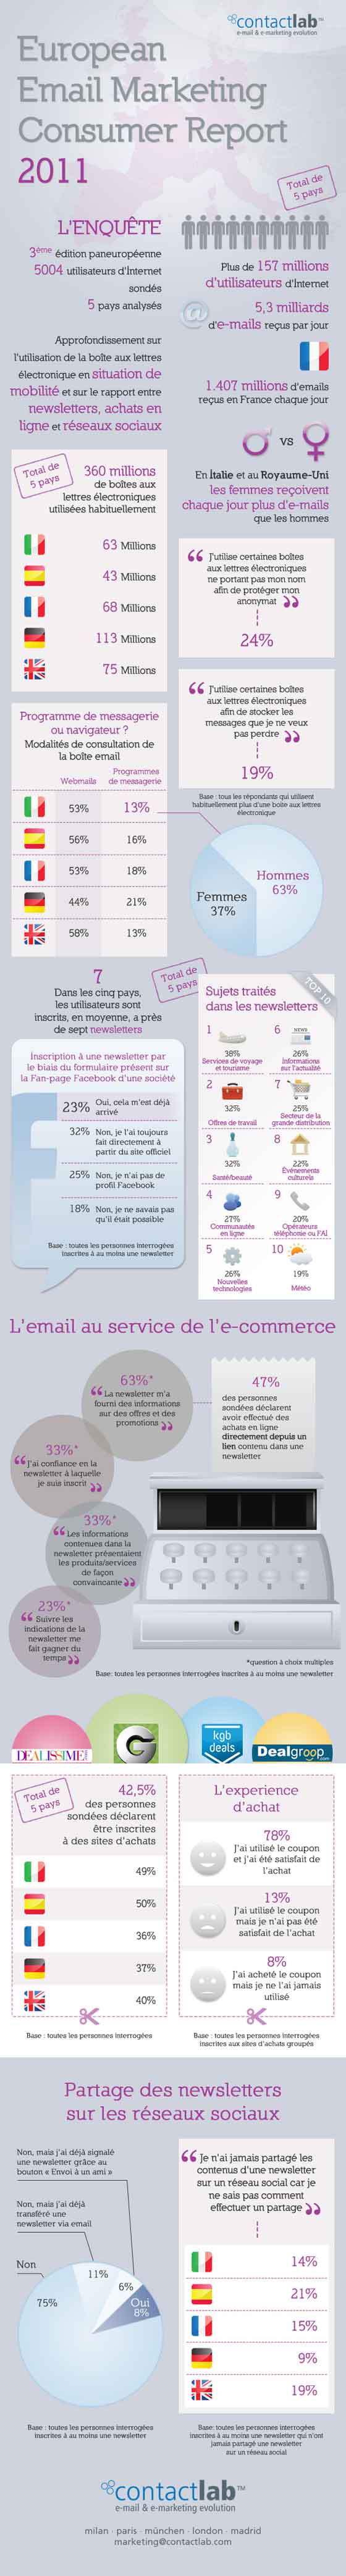 email-mkt-europe-report